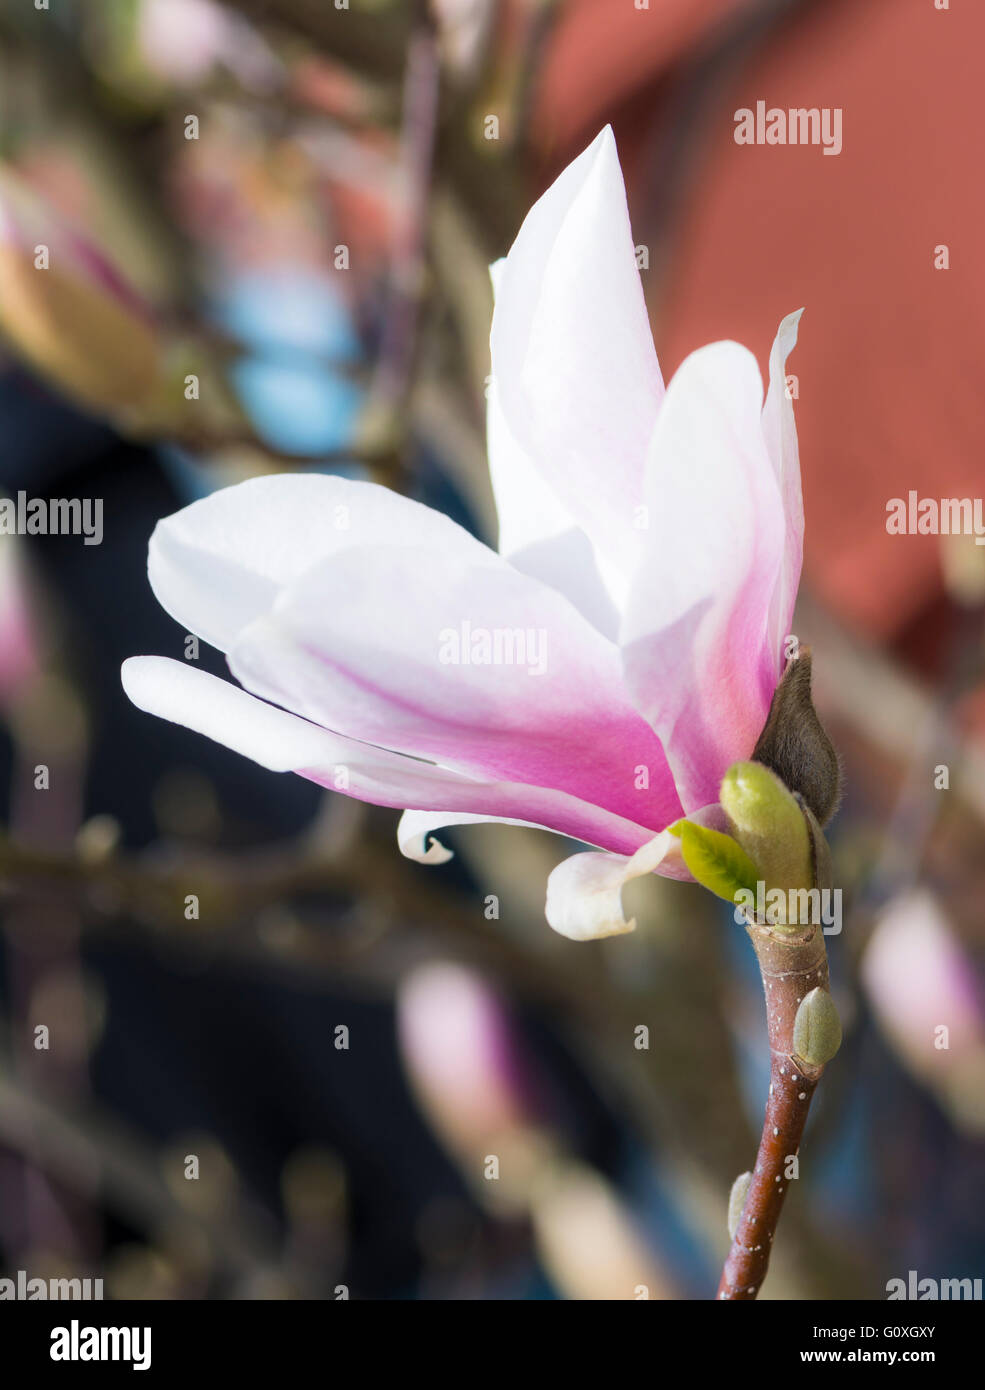 Twig of a flowering magnolia tree with white blossom Stock Photo